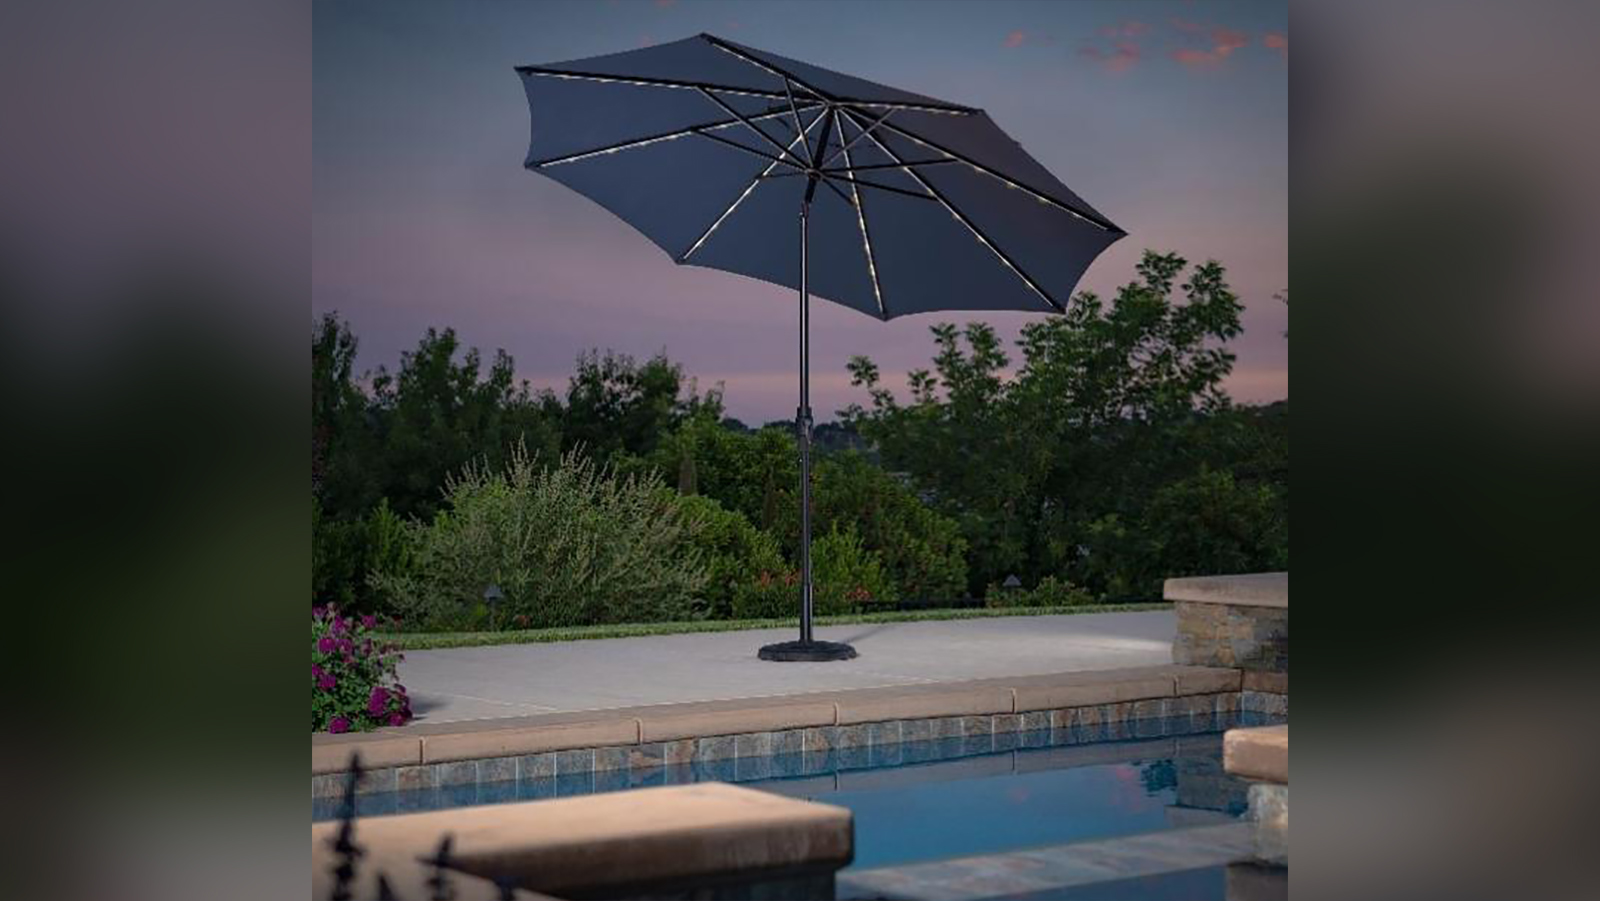 Solar Patio Umbrellas Sold At Costco Are Recalled After Multiple Fires – CBS Tampa